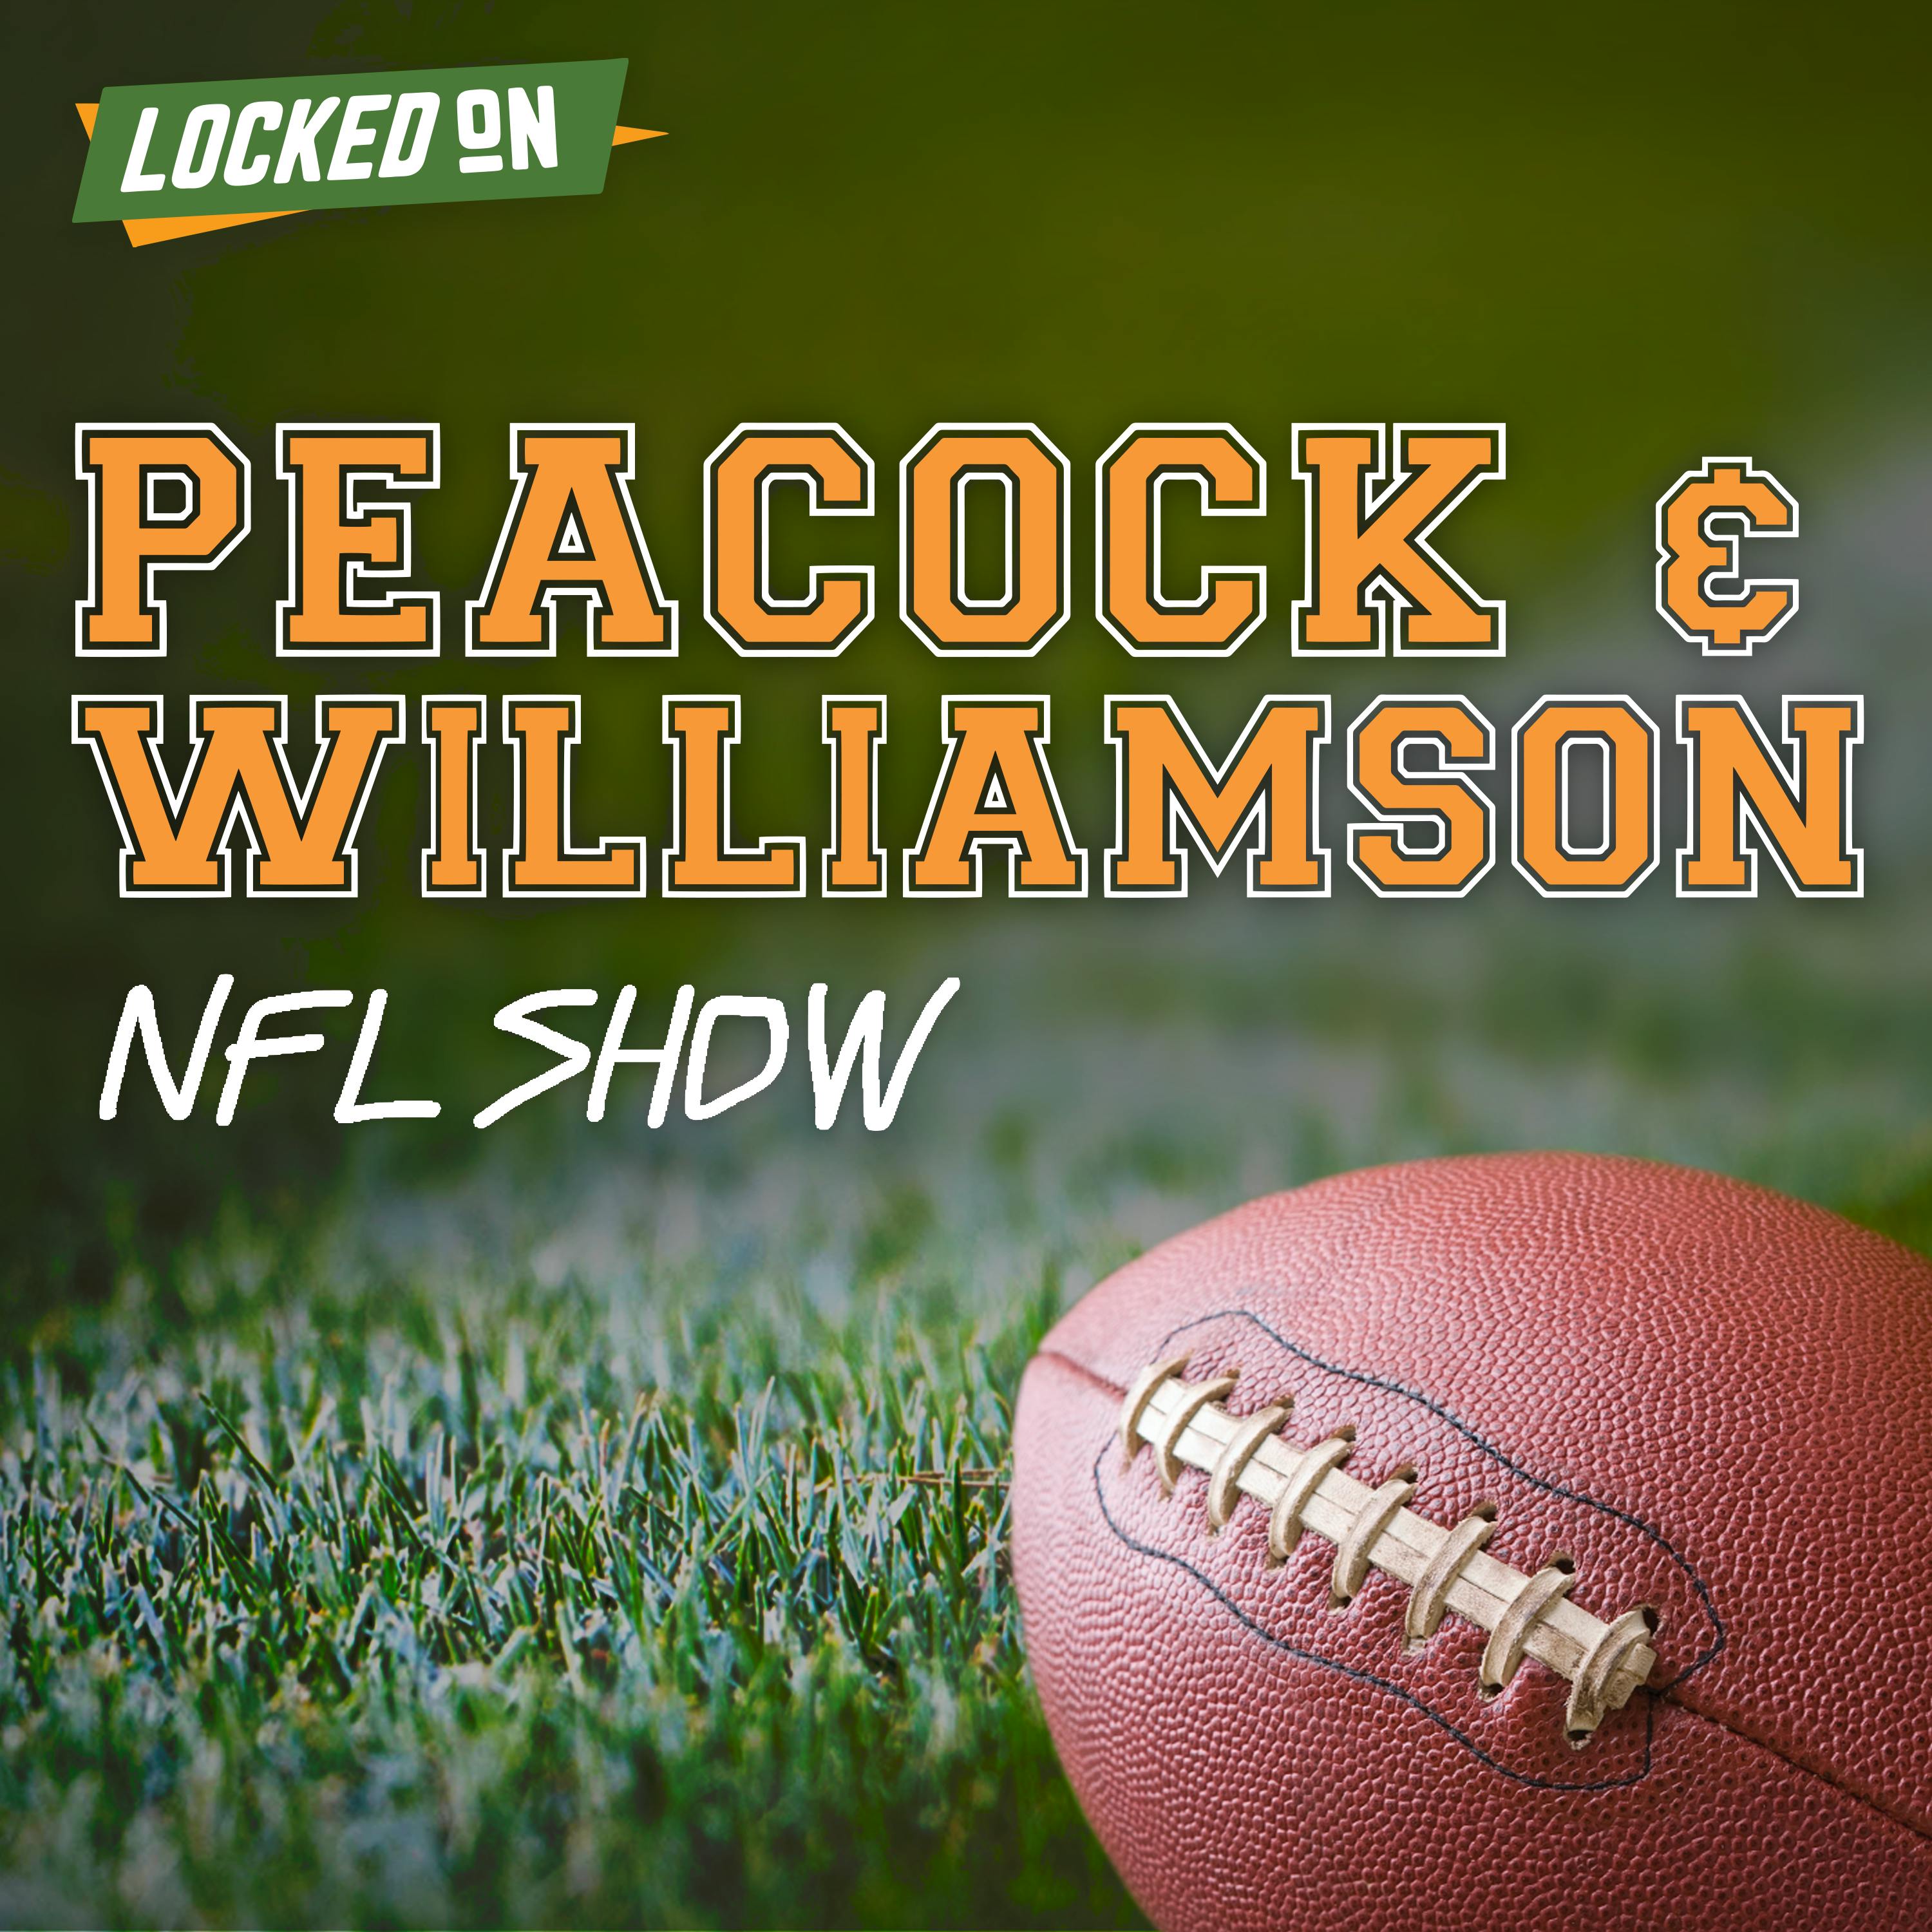 Peacock & Williamson: NFL Show on August 22, 2022